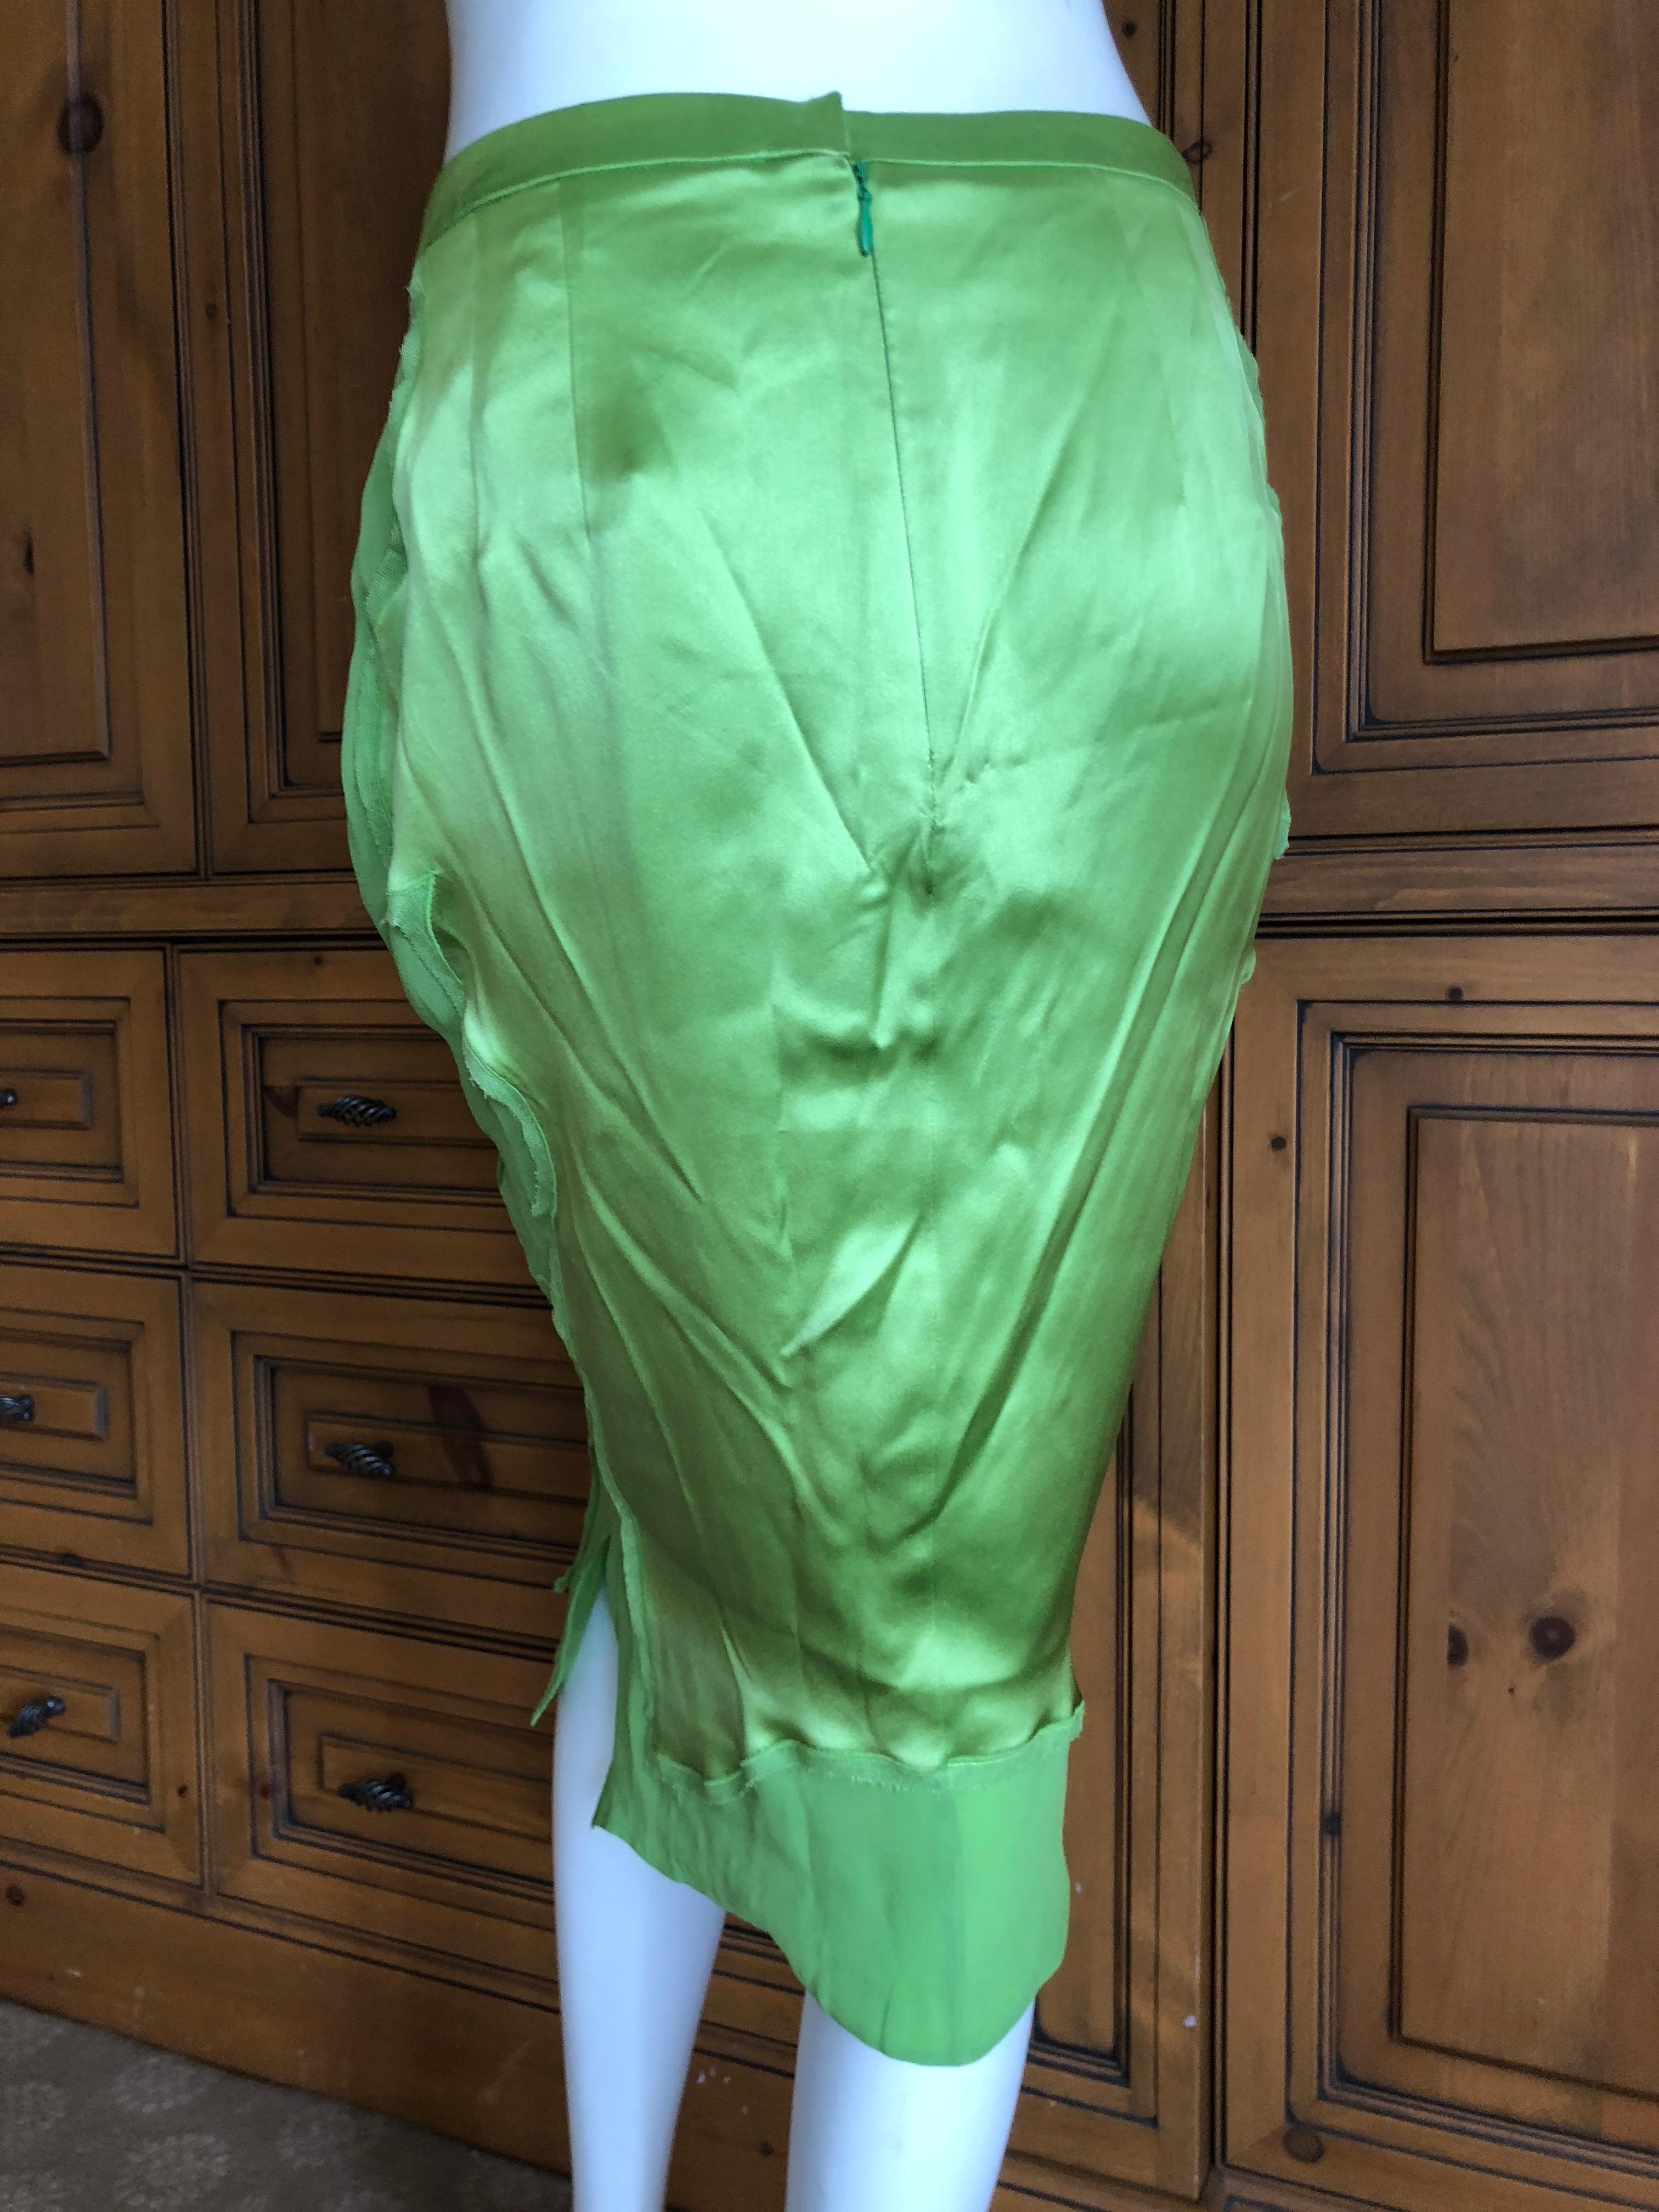 Yves Saint Laurent by Tom Ford 2004 Bright Green Silk Skirt New with Tags Sz 38 For Sale 1